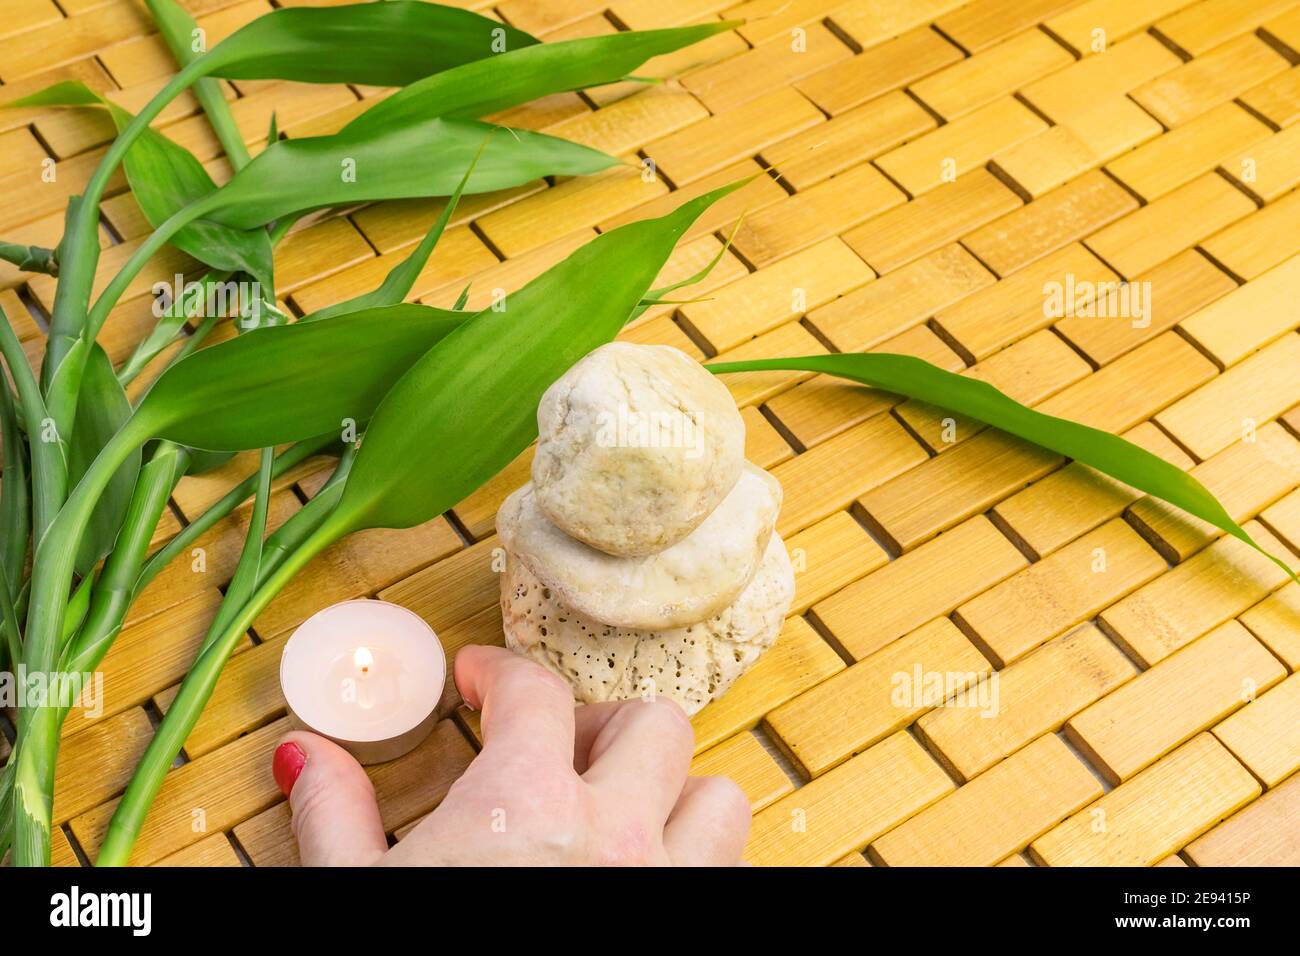 Spa, zen, massage concept. Woman hand holding lighting candle, bamboo leaves and white stone pyramid Stock Photo